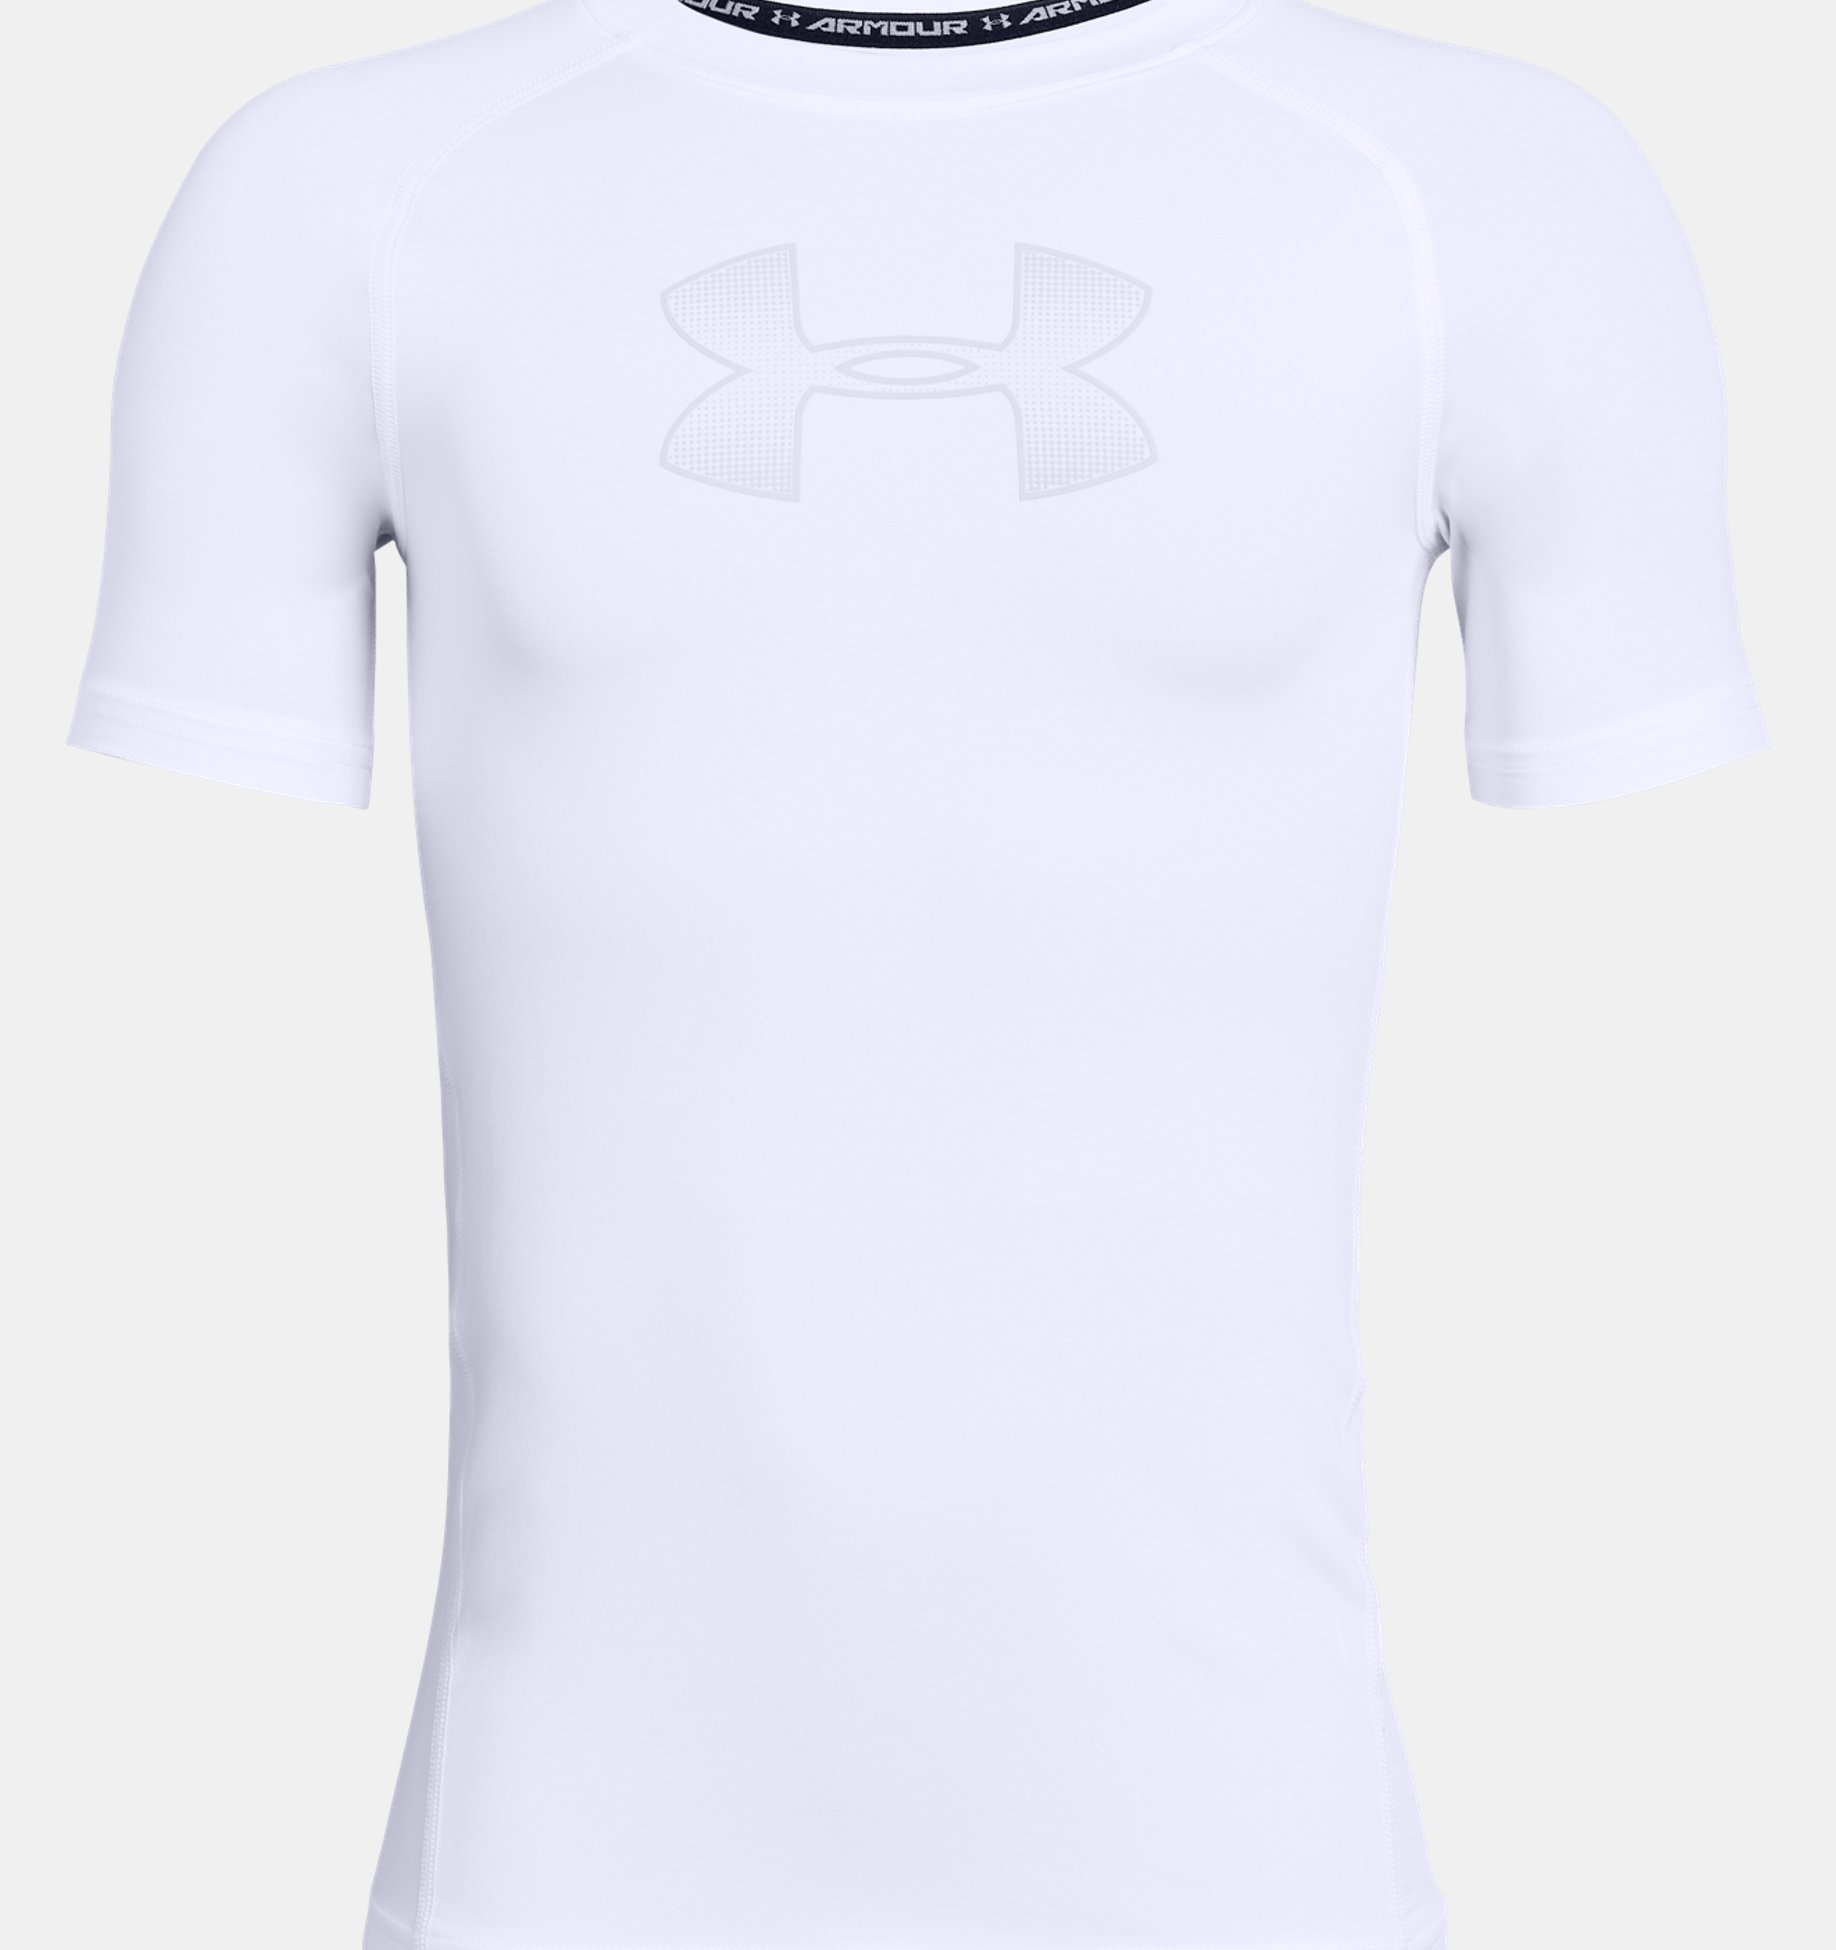 BRAND NEW UNDER ARMOUR COMRESSION SHORT youth LB 10/11 years old 